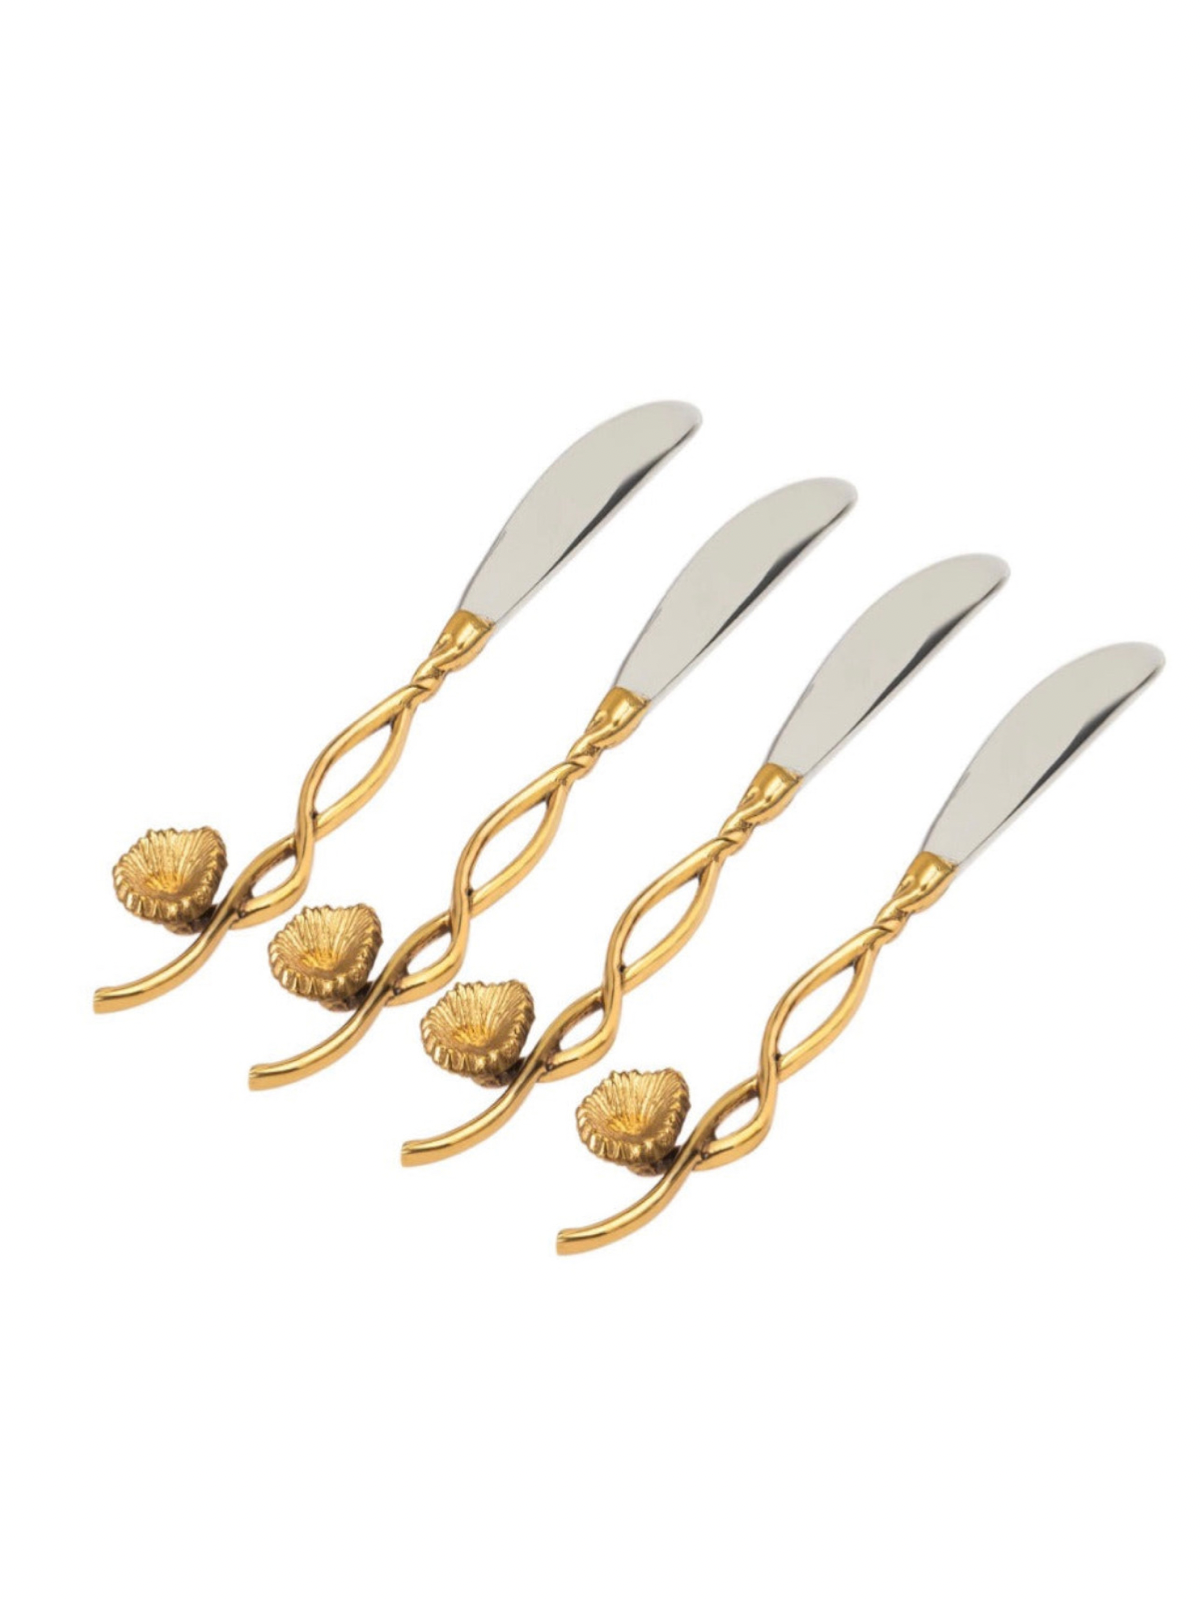 Stainless Steel Spreaders with Gold Flower Designed Handles.